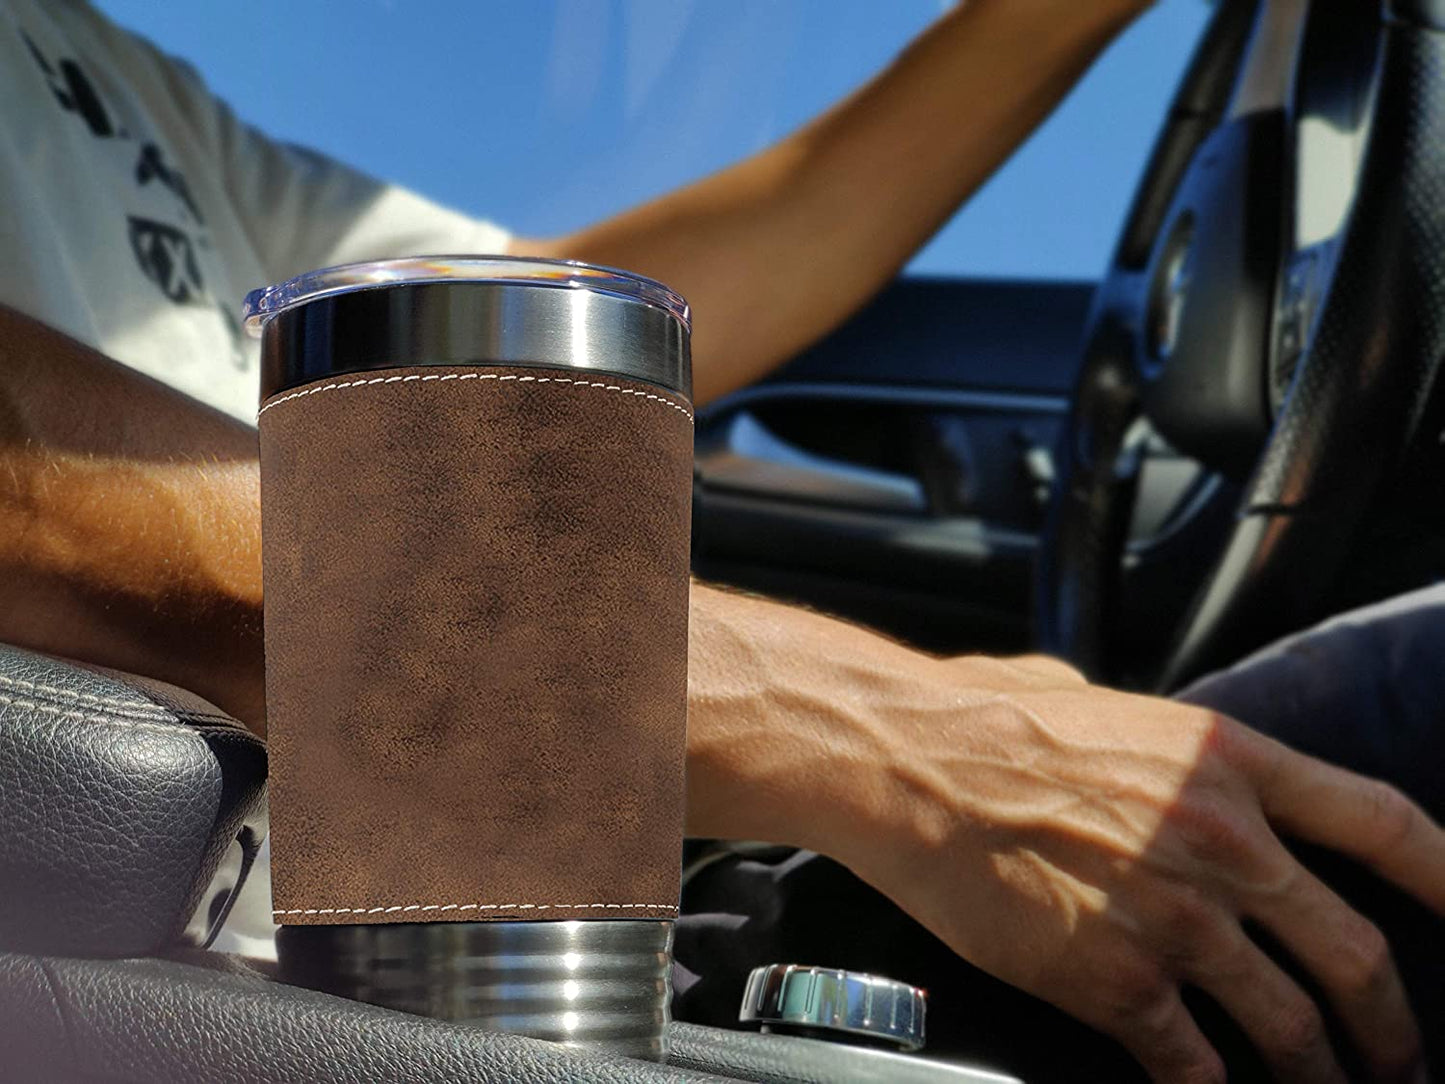 20oz Faux Leather Tumbler Mug, Chiropractic Symbol, Personalized Engraving Included - LaserGram Custom Engraved Gifts